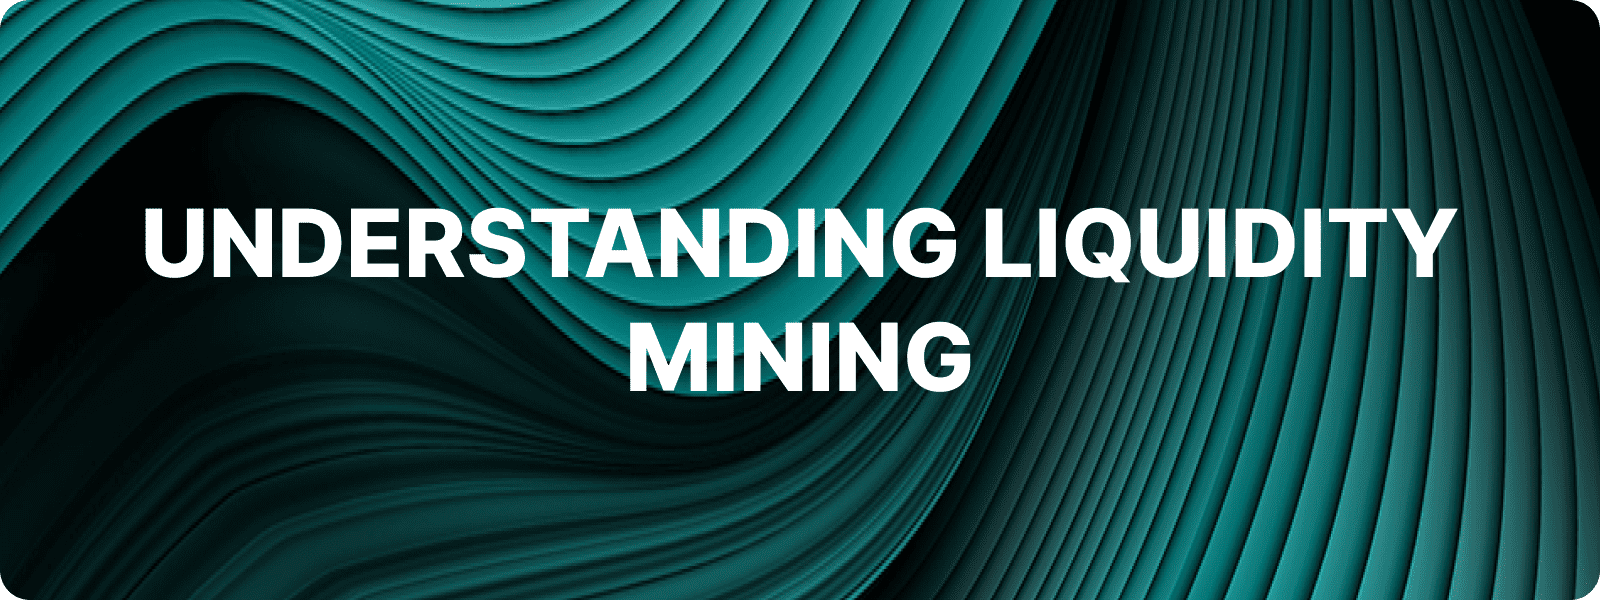 Understanding Liquidity Mining Before we jump into the steps for creating a Liquidity Mining DApp, let's ensure we have a clear understanding of what liquidity mining or yield farming is. Liquidity mining, often referred to as yield farming, is a technique that DeFi projects use to attract liquidity providers to their platforms.